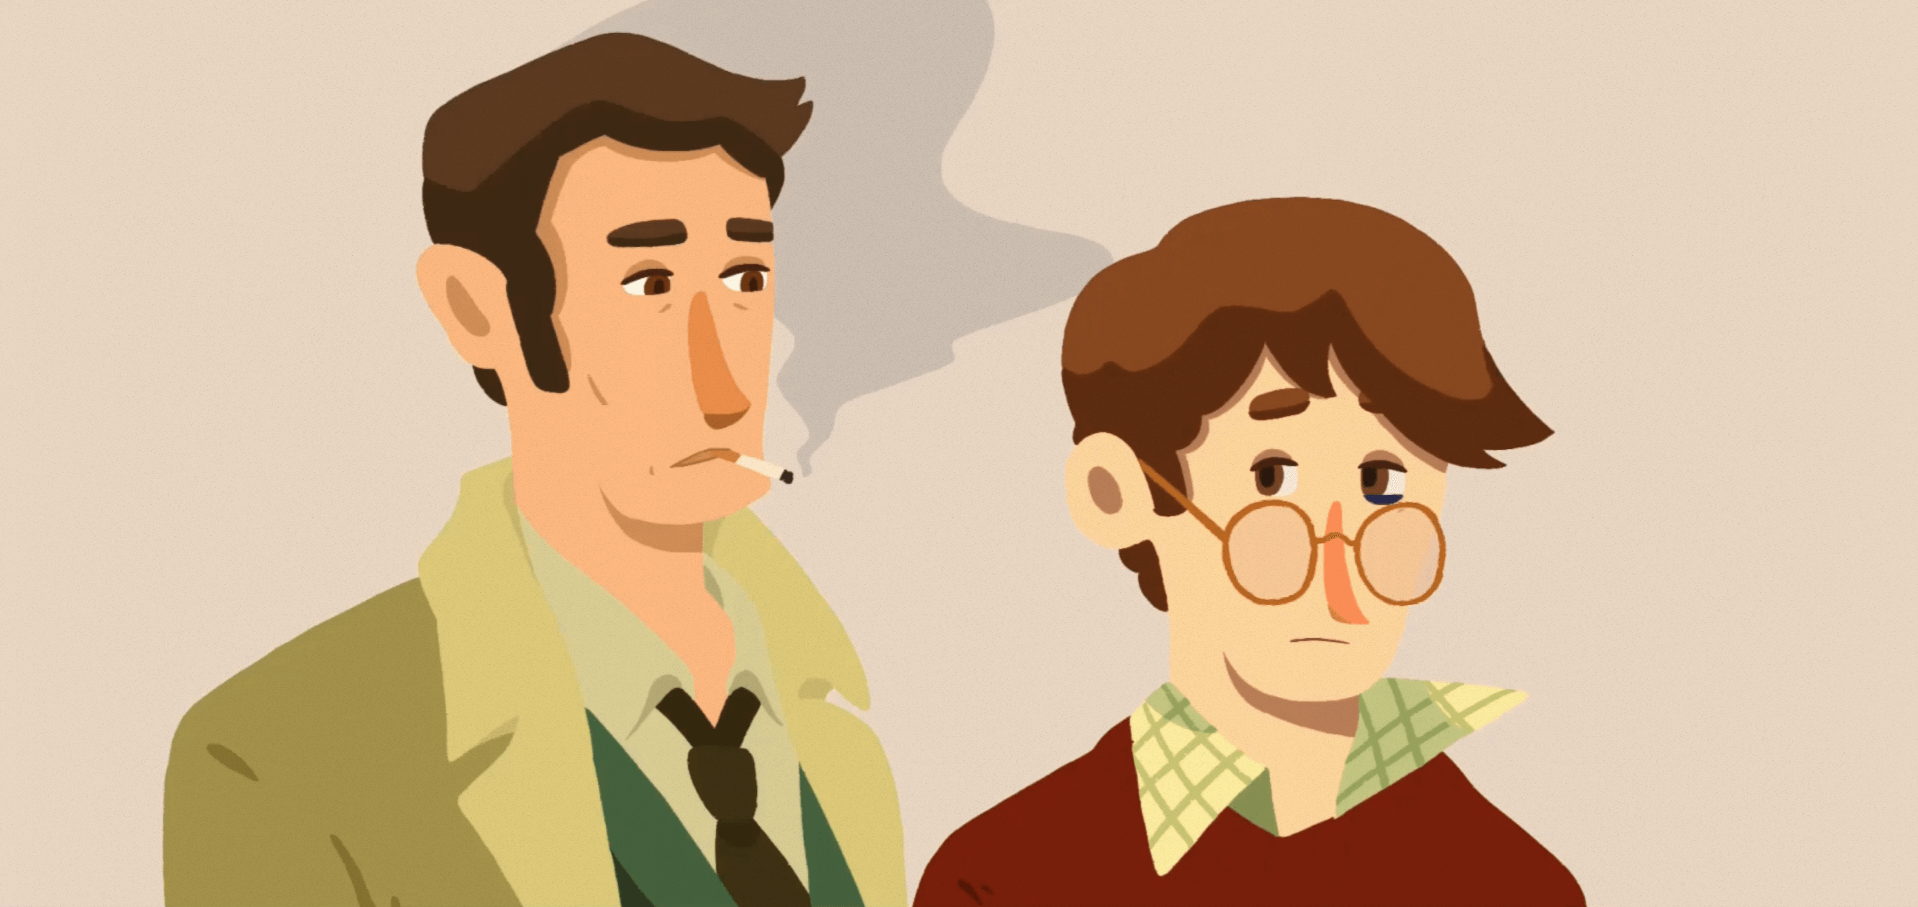 A still of the main character Eugène and Detective Malseki - your guide and hint giver for the game. Maleski is smoking a cigarette, playing up the moody detective stereotype.